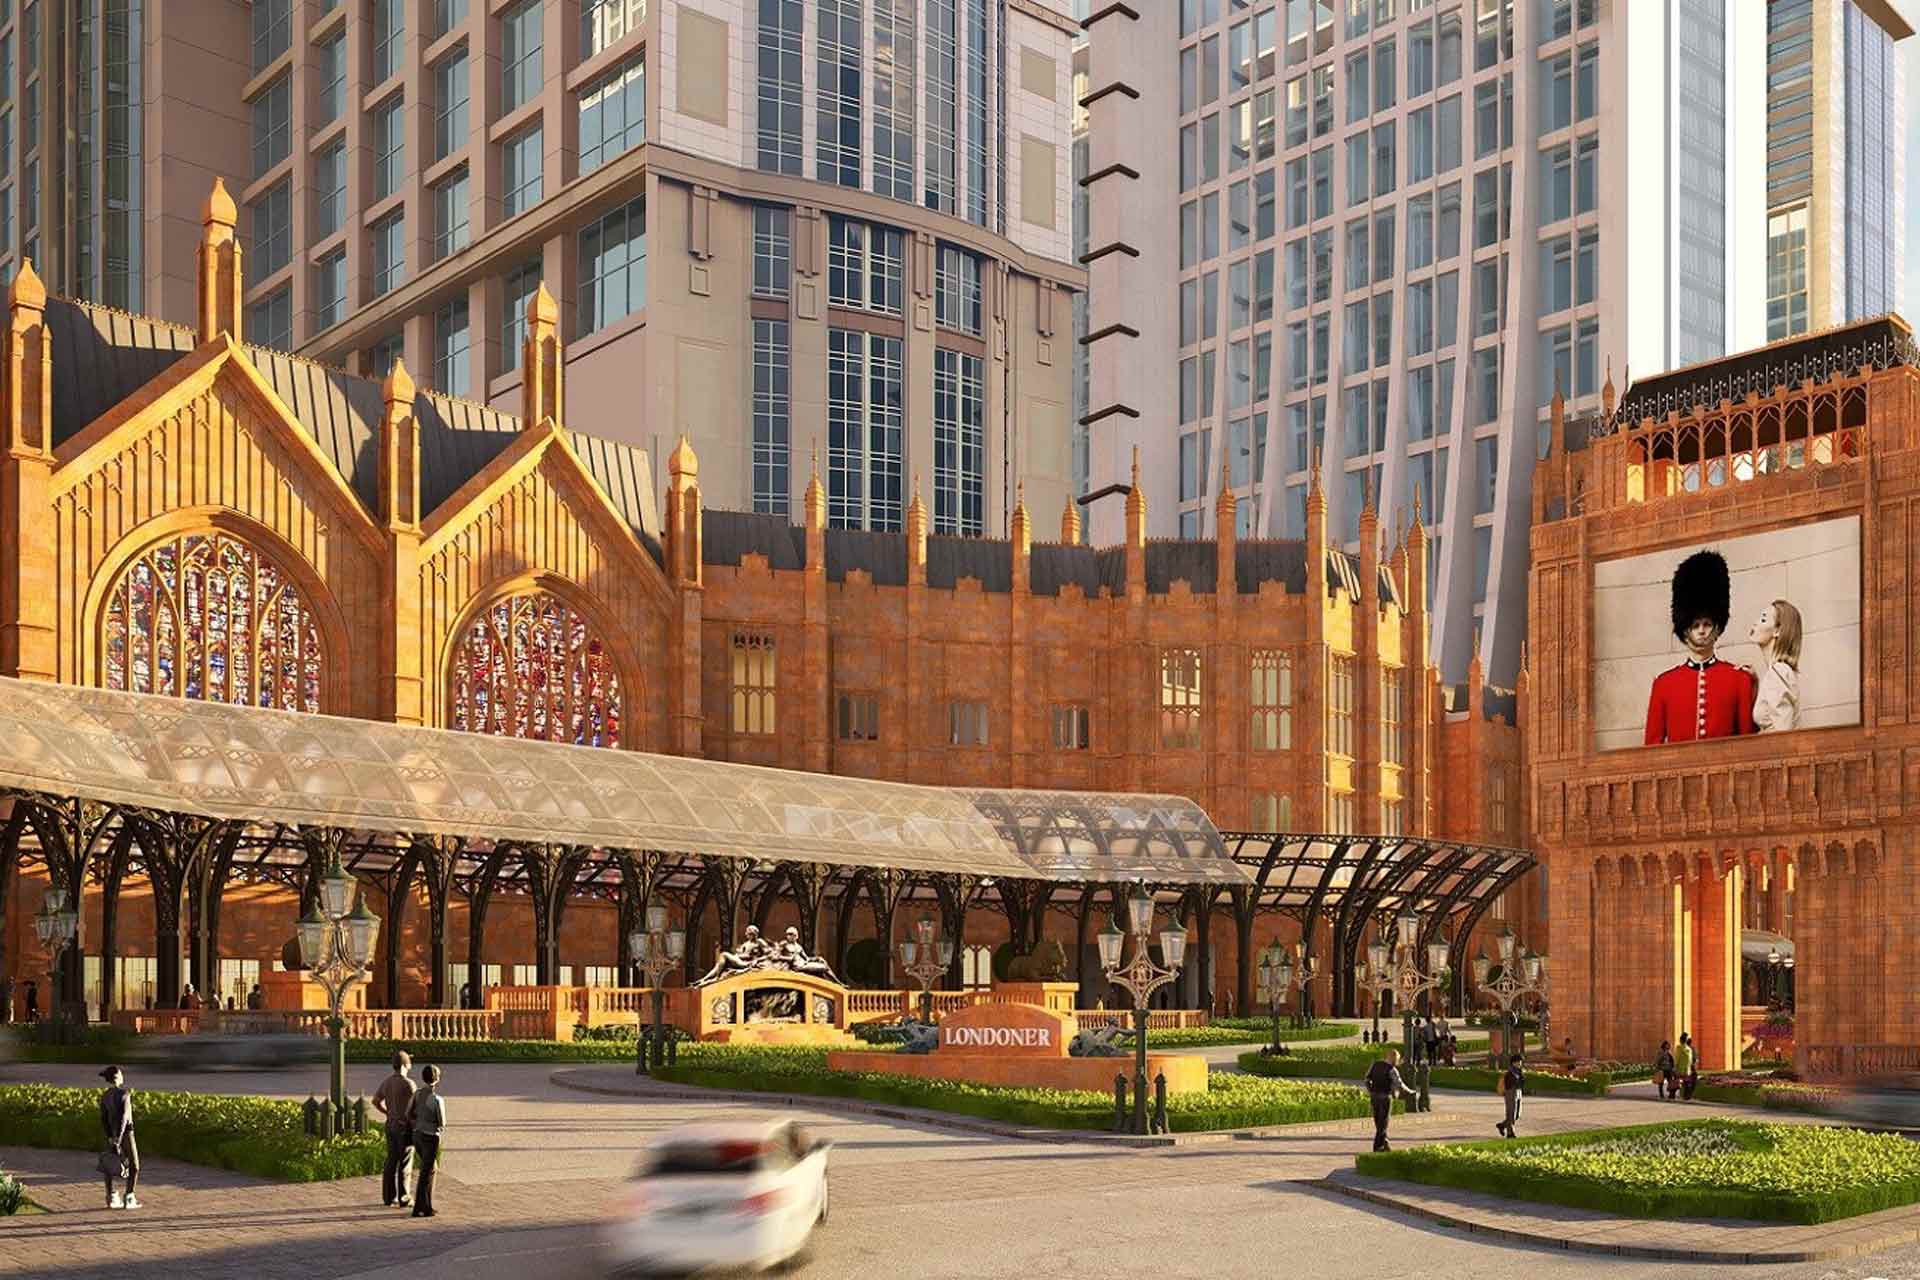 Sands group announces investment of USD 2.2 bn for Londoner Macao